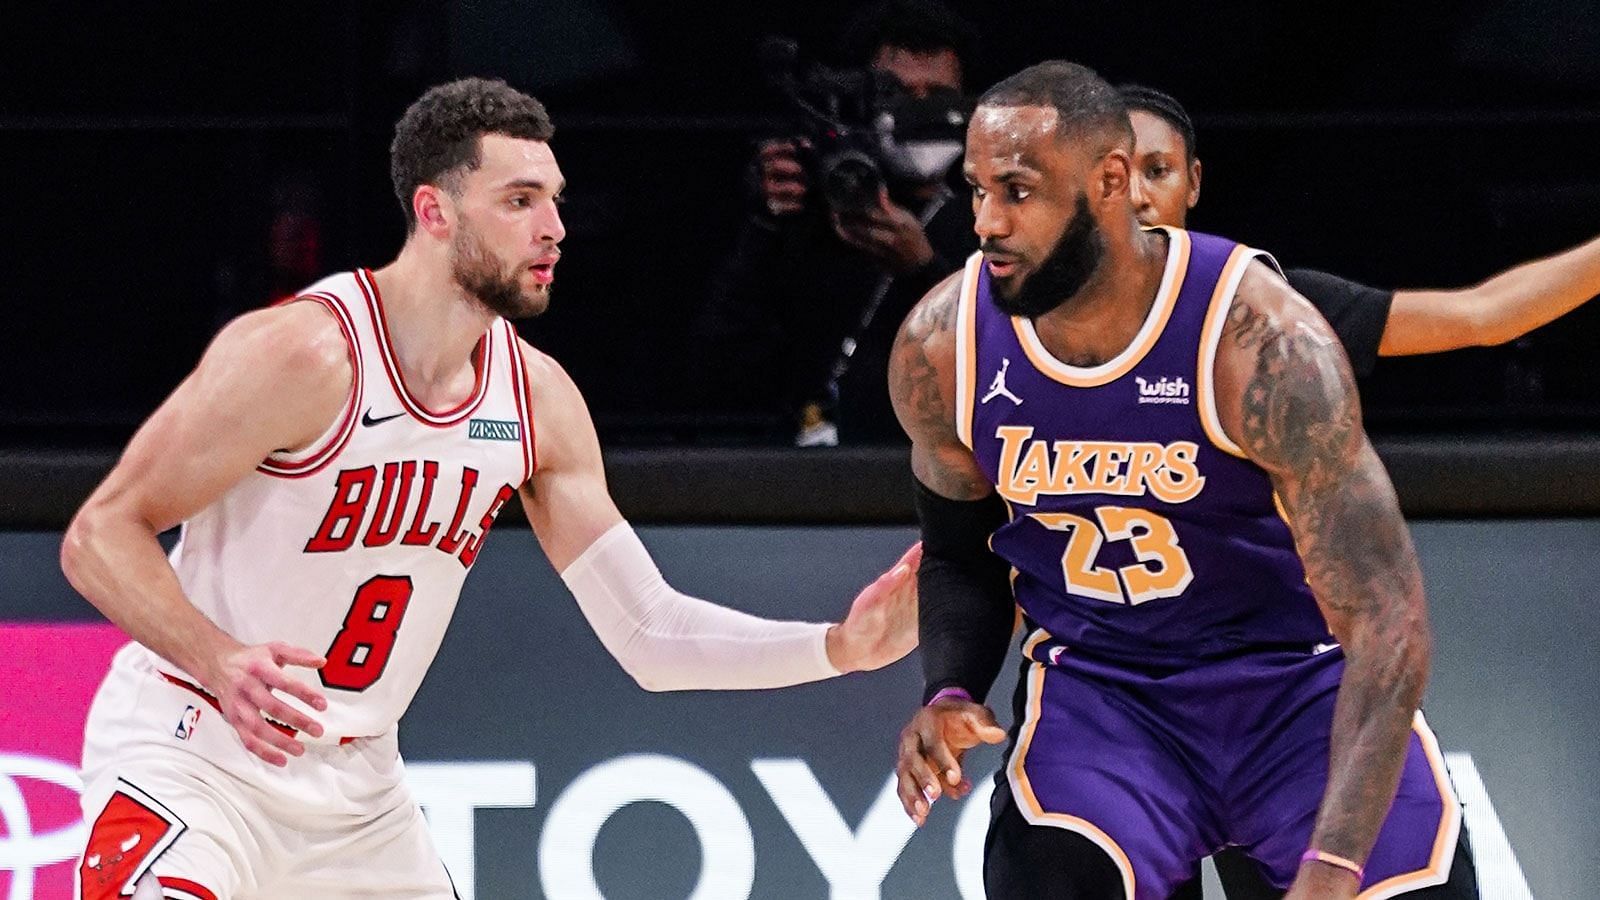 Zach LaVine would be an ideal fit for the LA Lakers if they can improbably sign him in the offseason. [Photo: NBA.com]